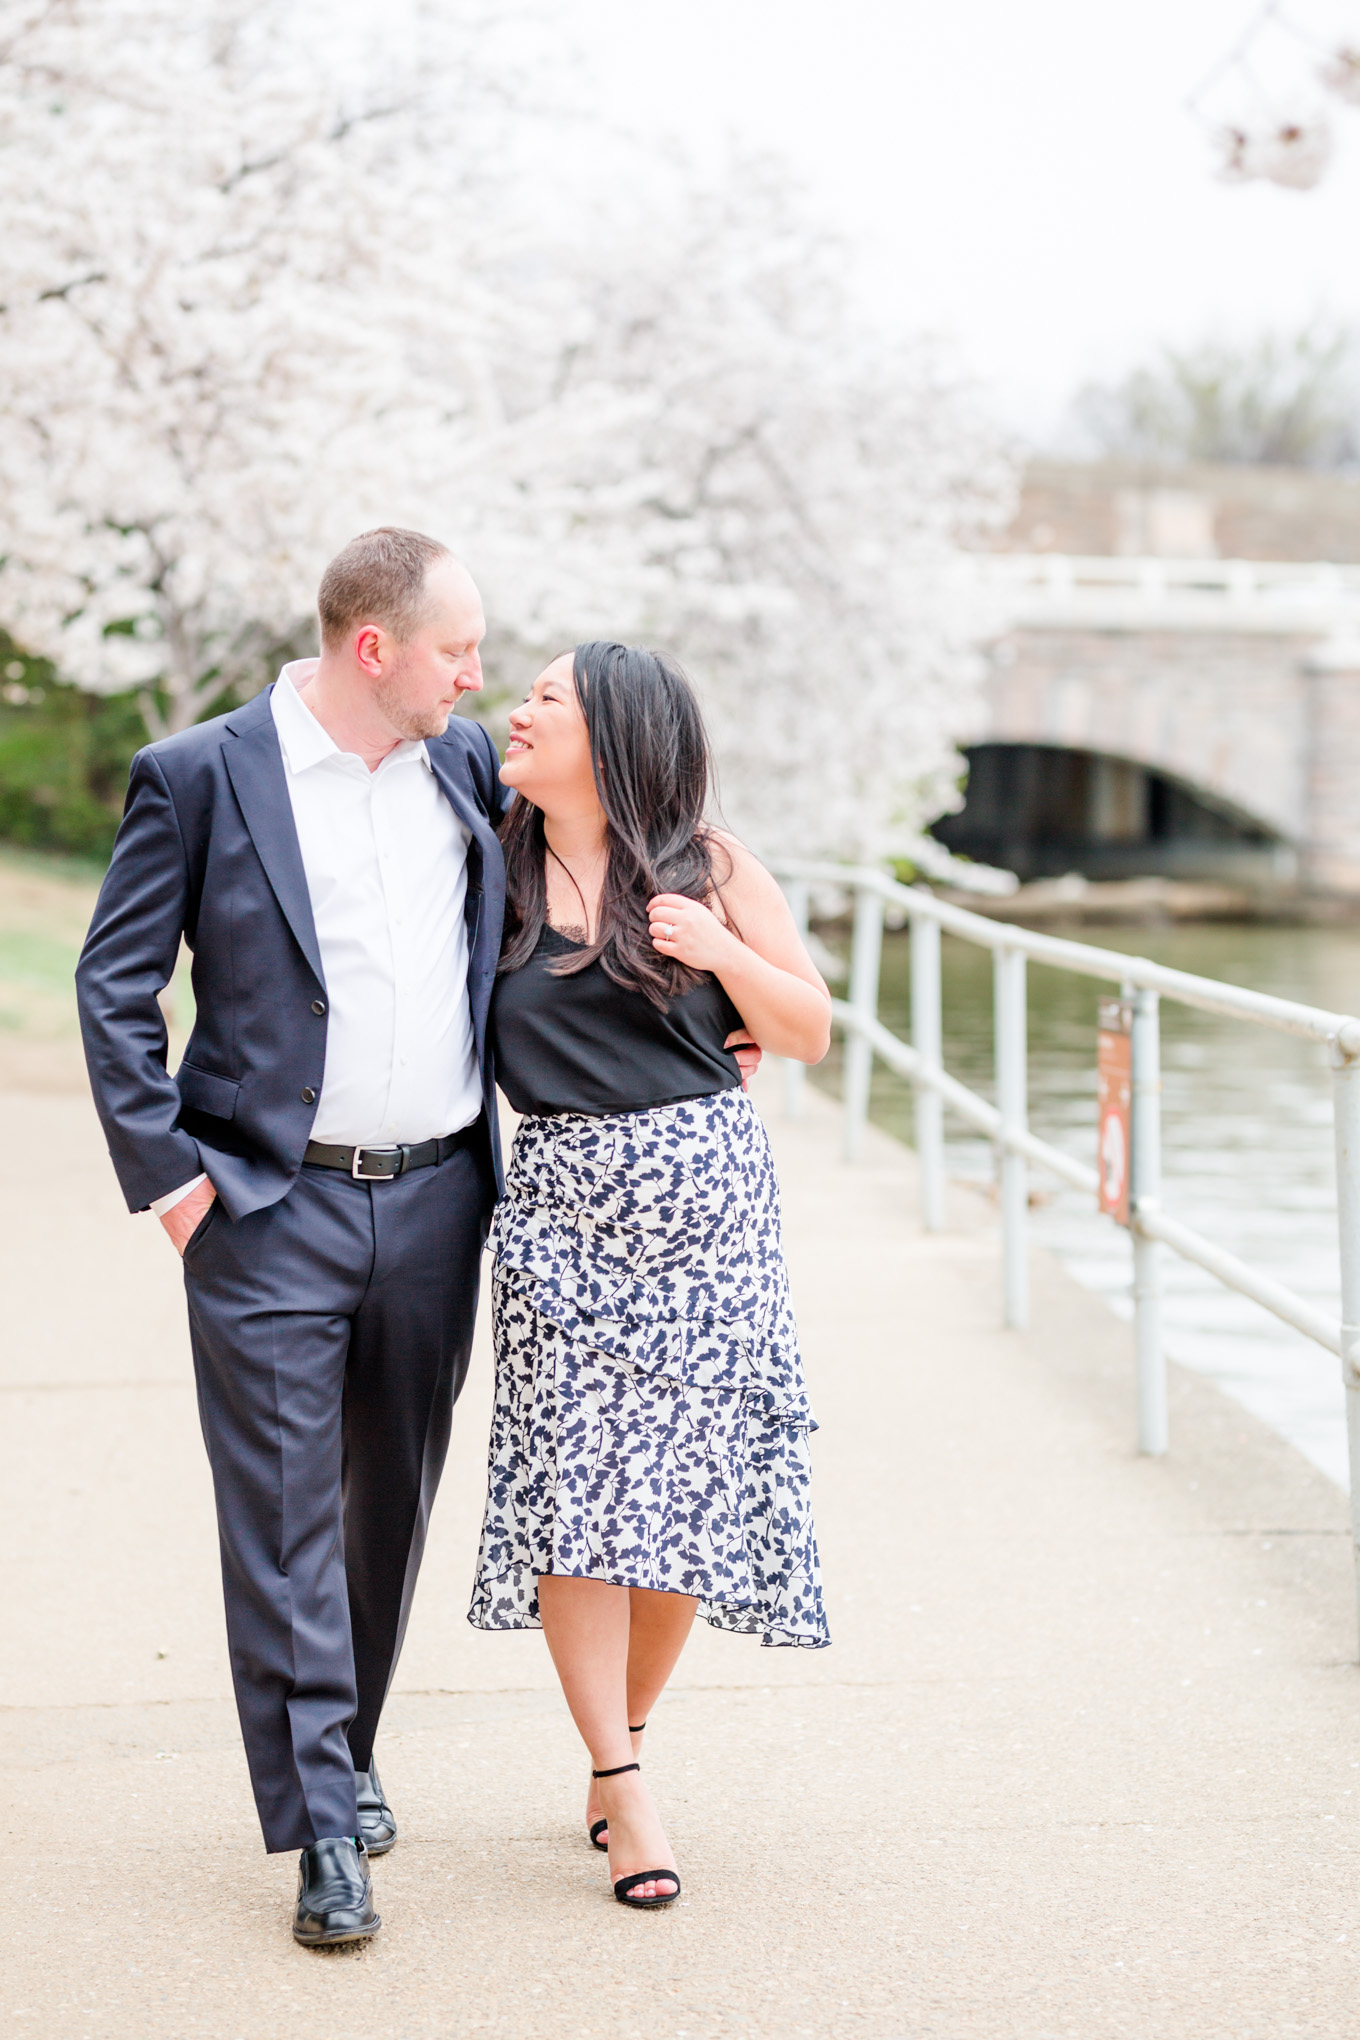 big weekend, engaged couple, engagement portraits, photo shoot outfit ideas, black and white outfits, floral skirt, navy suit, cherry blossom engagement portraits, cherry blossom portraits, cherry blossoms, DC cherry blossoms, tidal basin, DC tidal basin